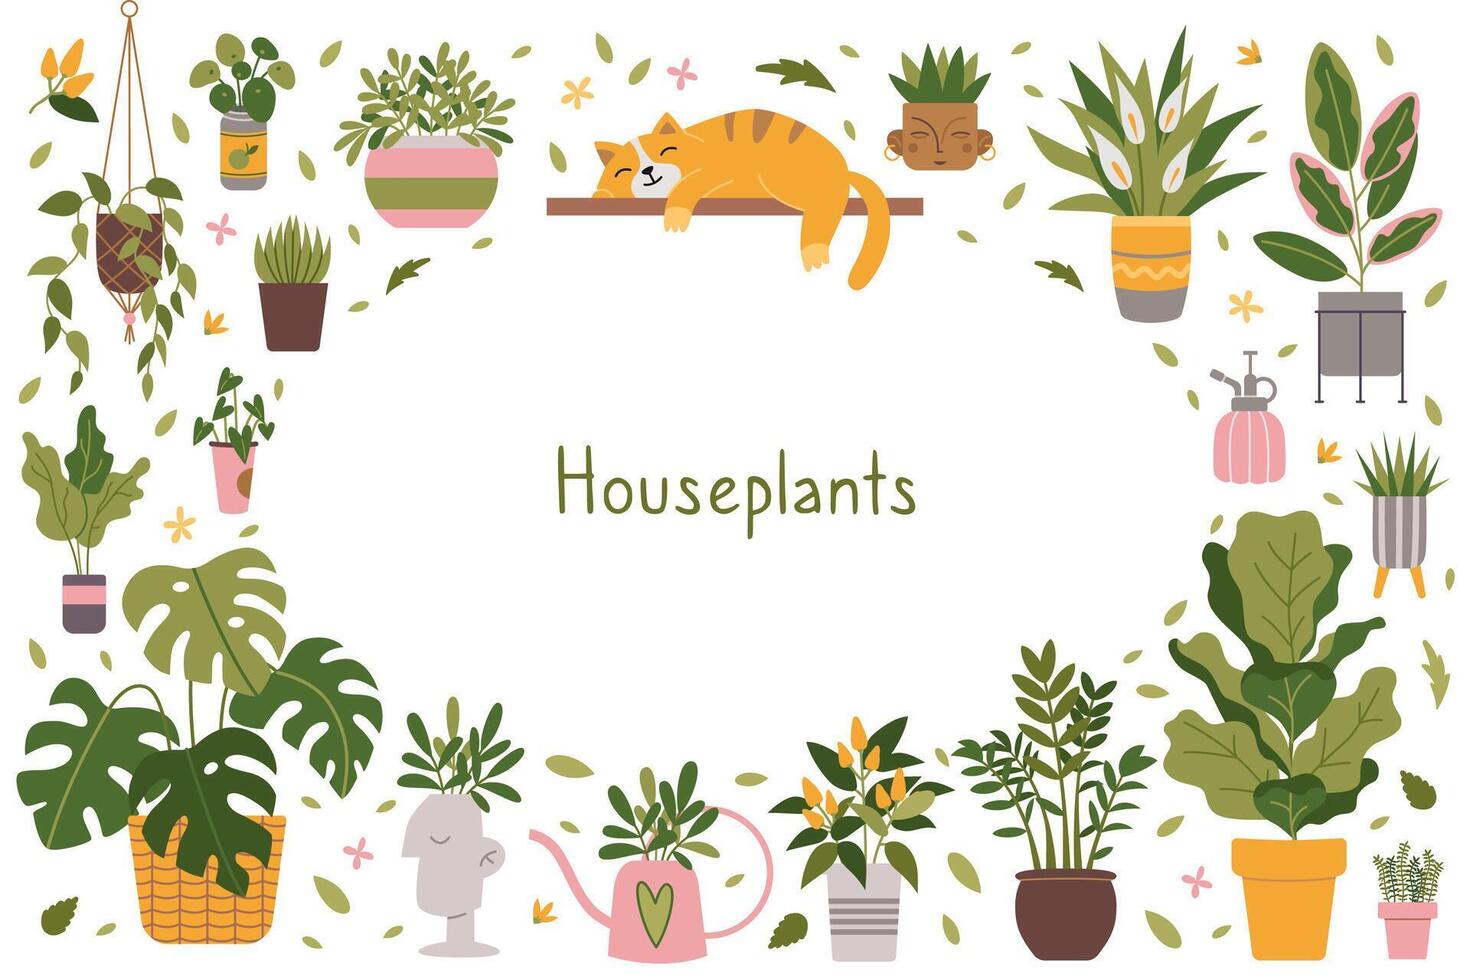 Frame with trendy potted plants, cartoon style. Indoor houseplants for interior and cute cat. Urban Cozy home gardening hobby set. Modern isolated illustration, hand drawn, flat vector